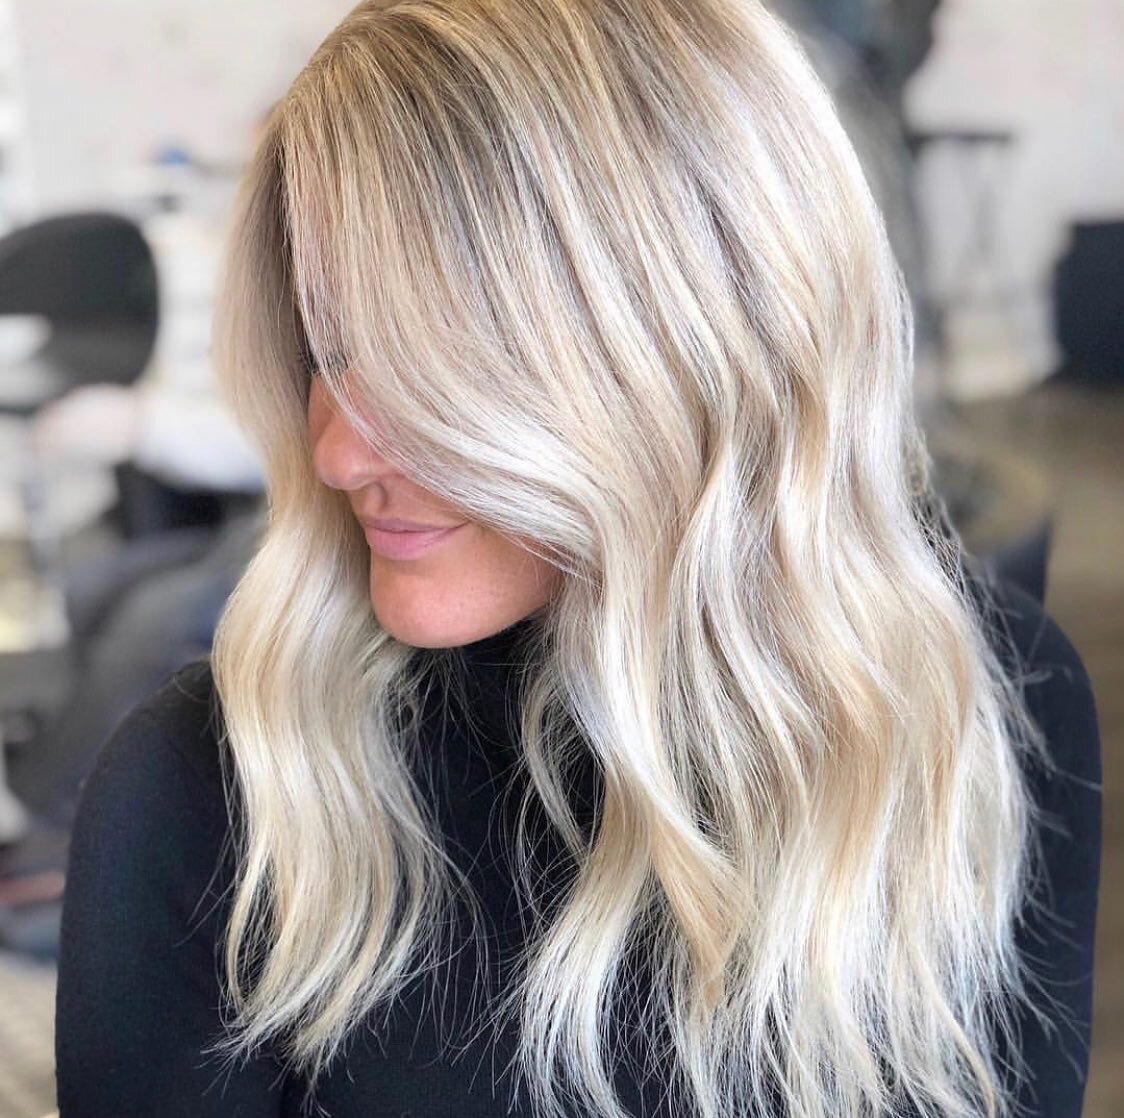 Saturday appts available- come get your blonde on!! 💛
.
.
.
Booking by phone 𝟰𝟭𝟵-𝟴𝟴𝟱-𝟭𝟭𝟰𝟬 
.
.
.
.
.
.
.
.
.
. #michiganhair #michiganhairsalon #michiganhairstylists #toledohairstylist #toledohair #toledohairsalon #sylvaniaohio #toledoohio